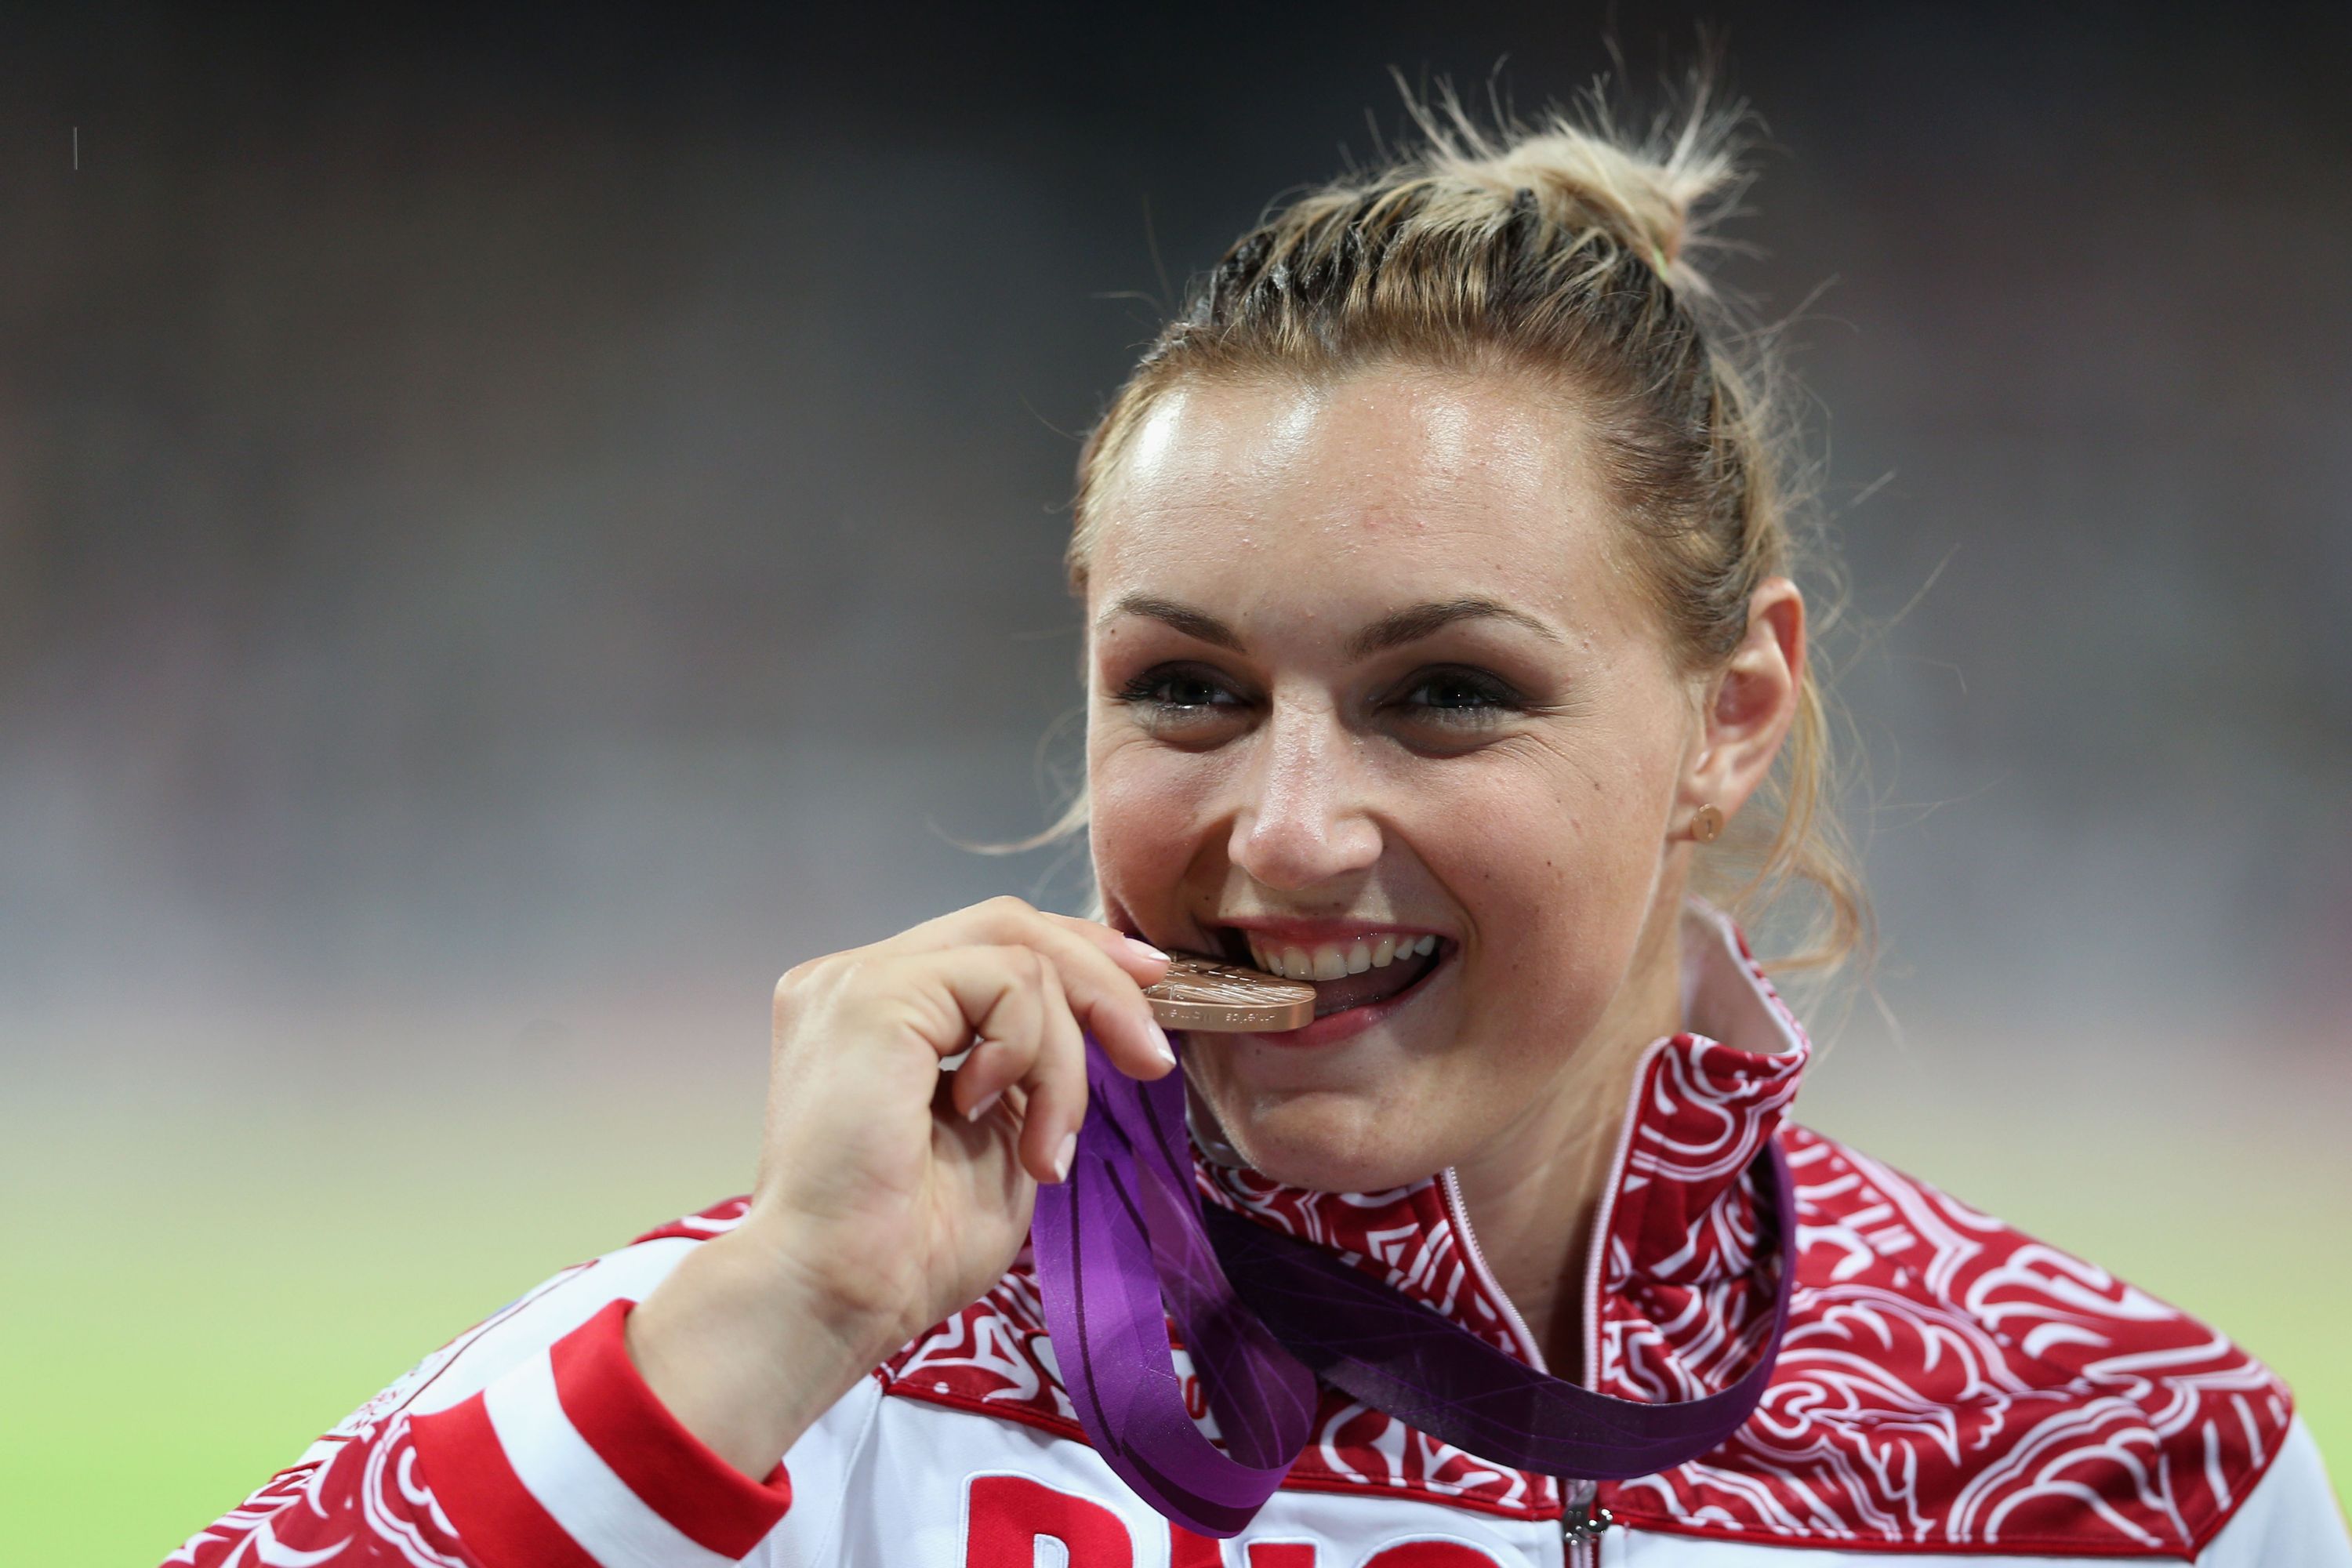 LONDON, ENGLAND - AUGUST 06:  Bronze medalist Evgeniia Kolodko of Russia poses on the podium during the medal ceremony for the Women's Shot Put final on Day 10 of the London 2012 Olympic Games at the Olympic Stadium on August 6, 2012 in London, England.  (Photo by Clive Brunskill/Getty Images)